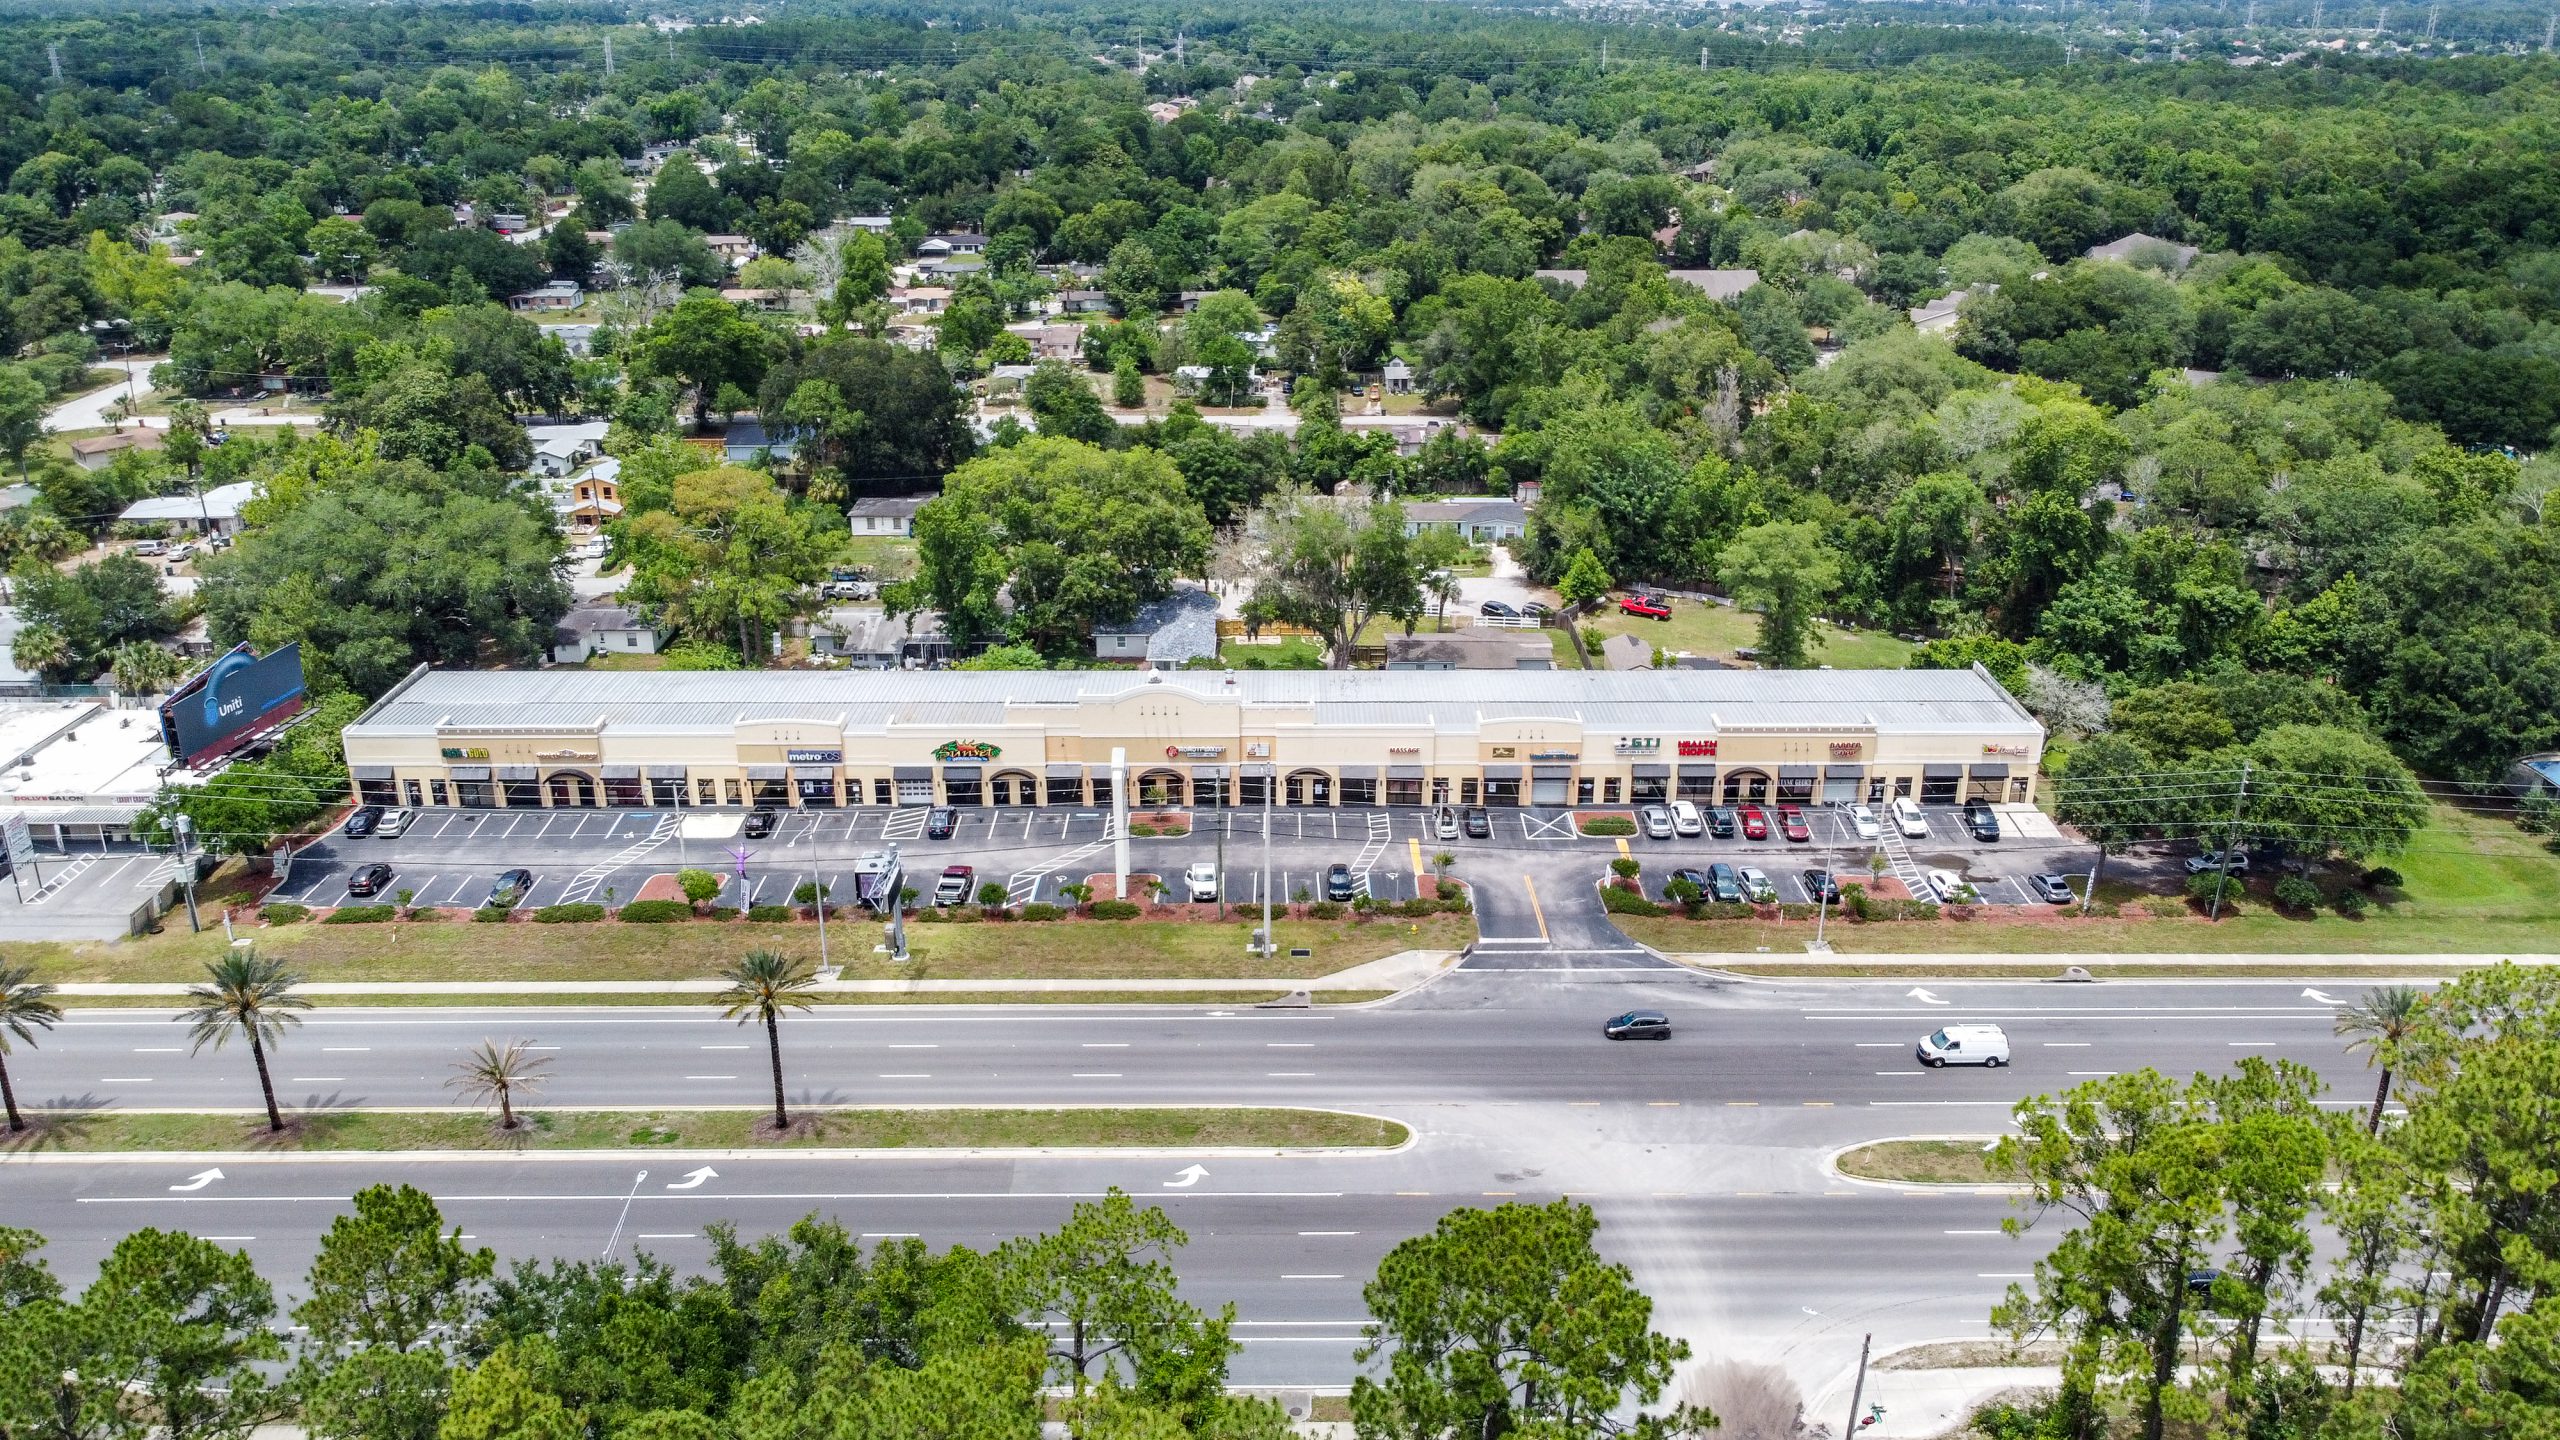 An aerial view of A one-story retail center.